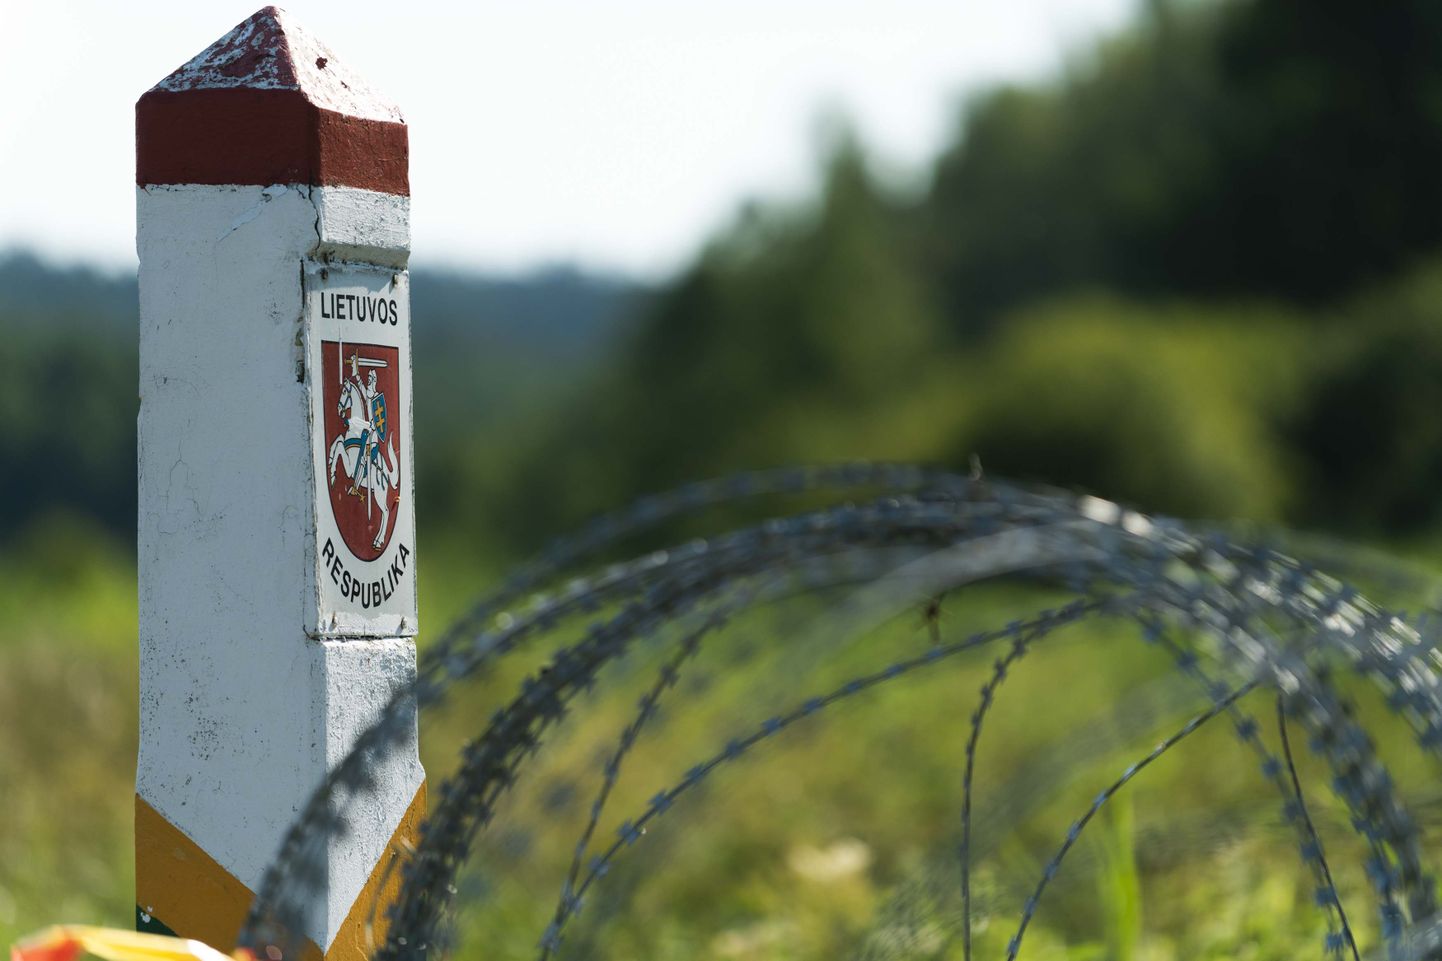 Lithuanian media and opposition accuse the government of buying "golden" barbed wire from Estonia.